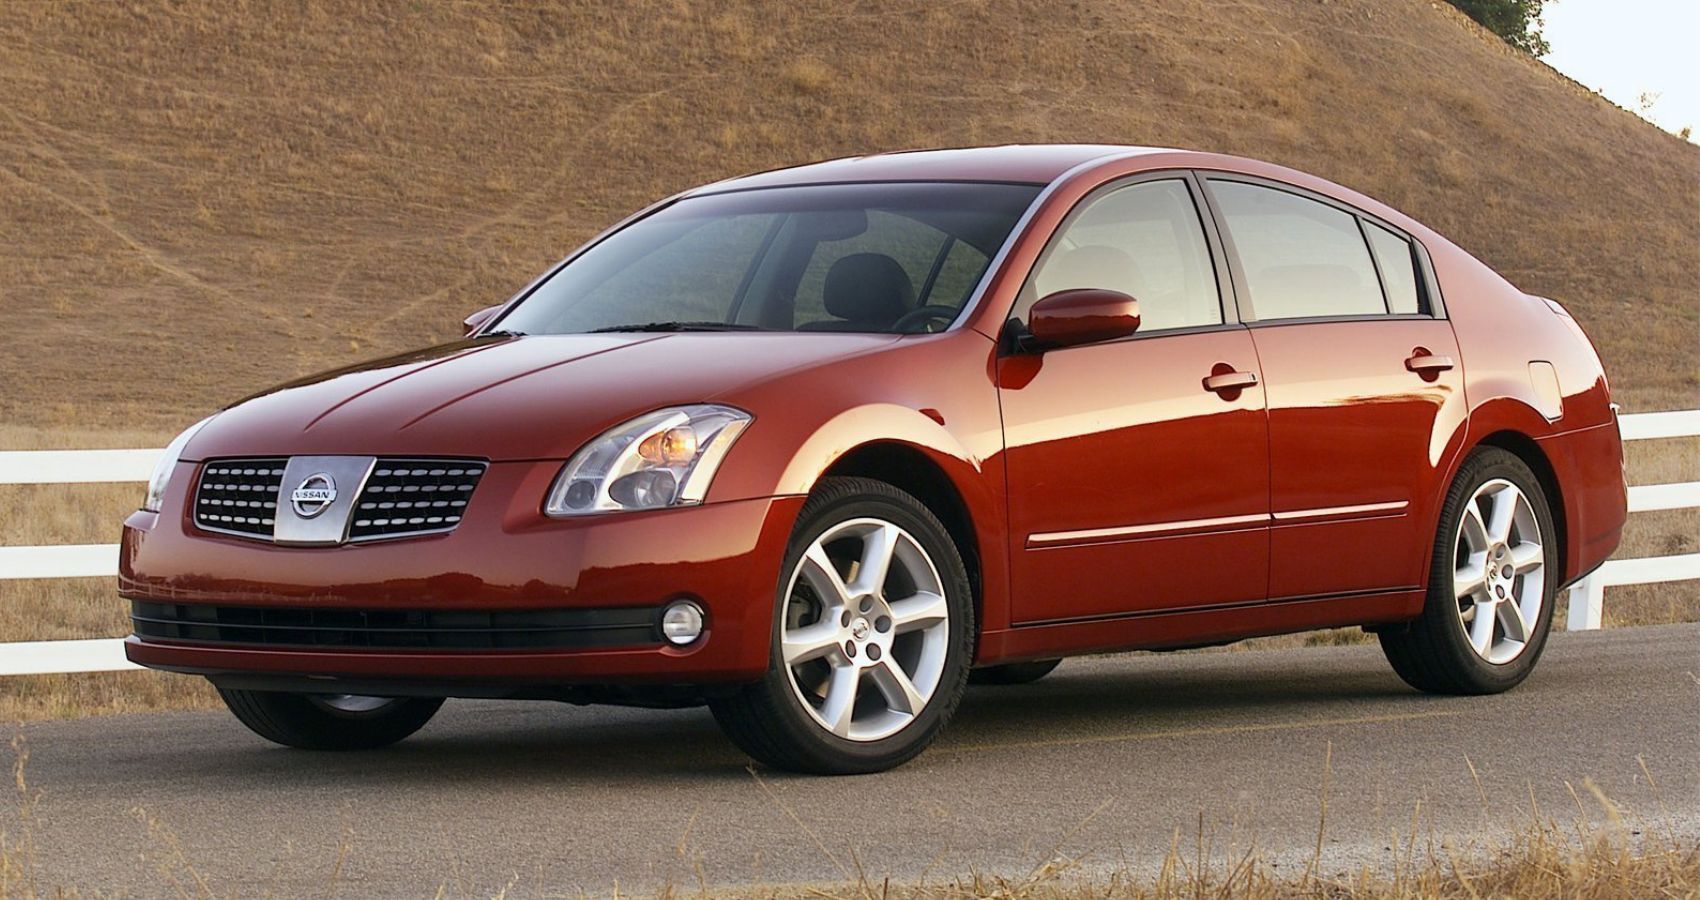 2004 Nissan Maxima in Red